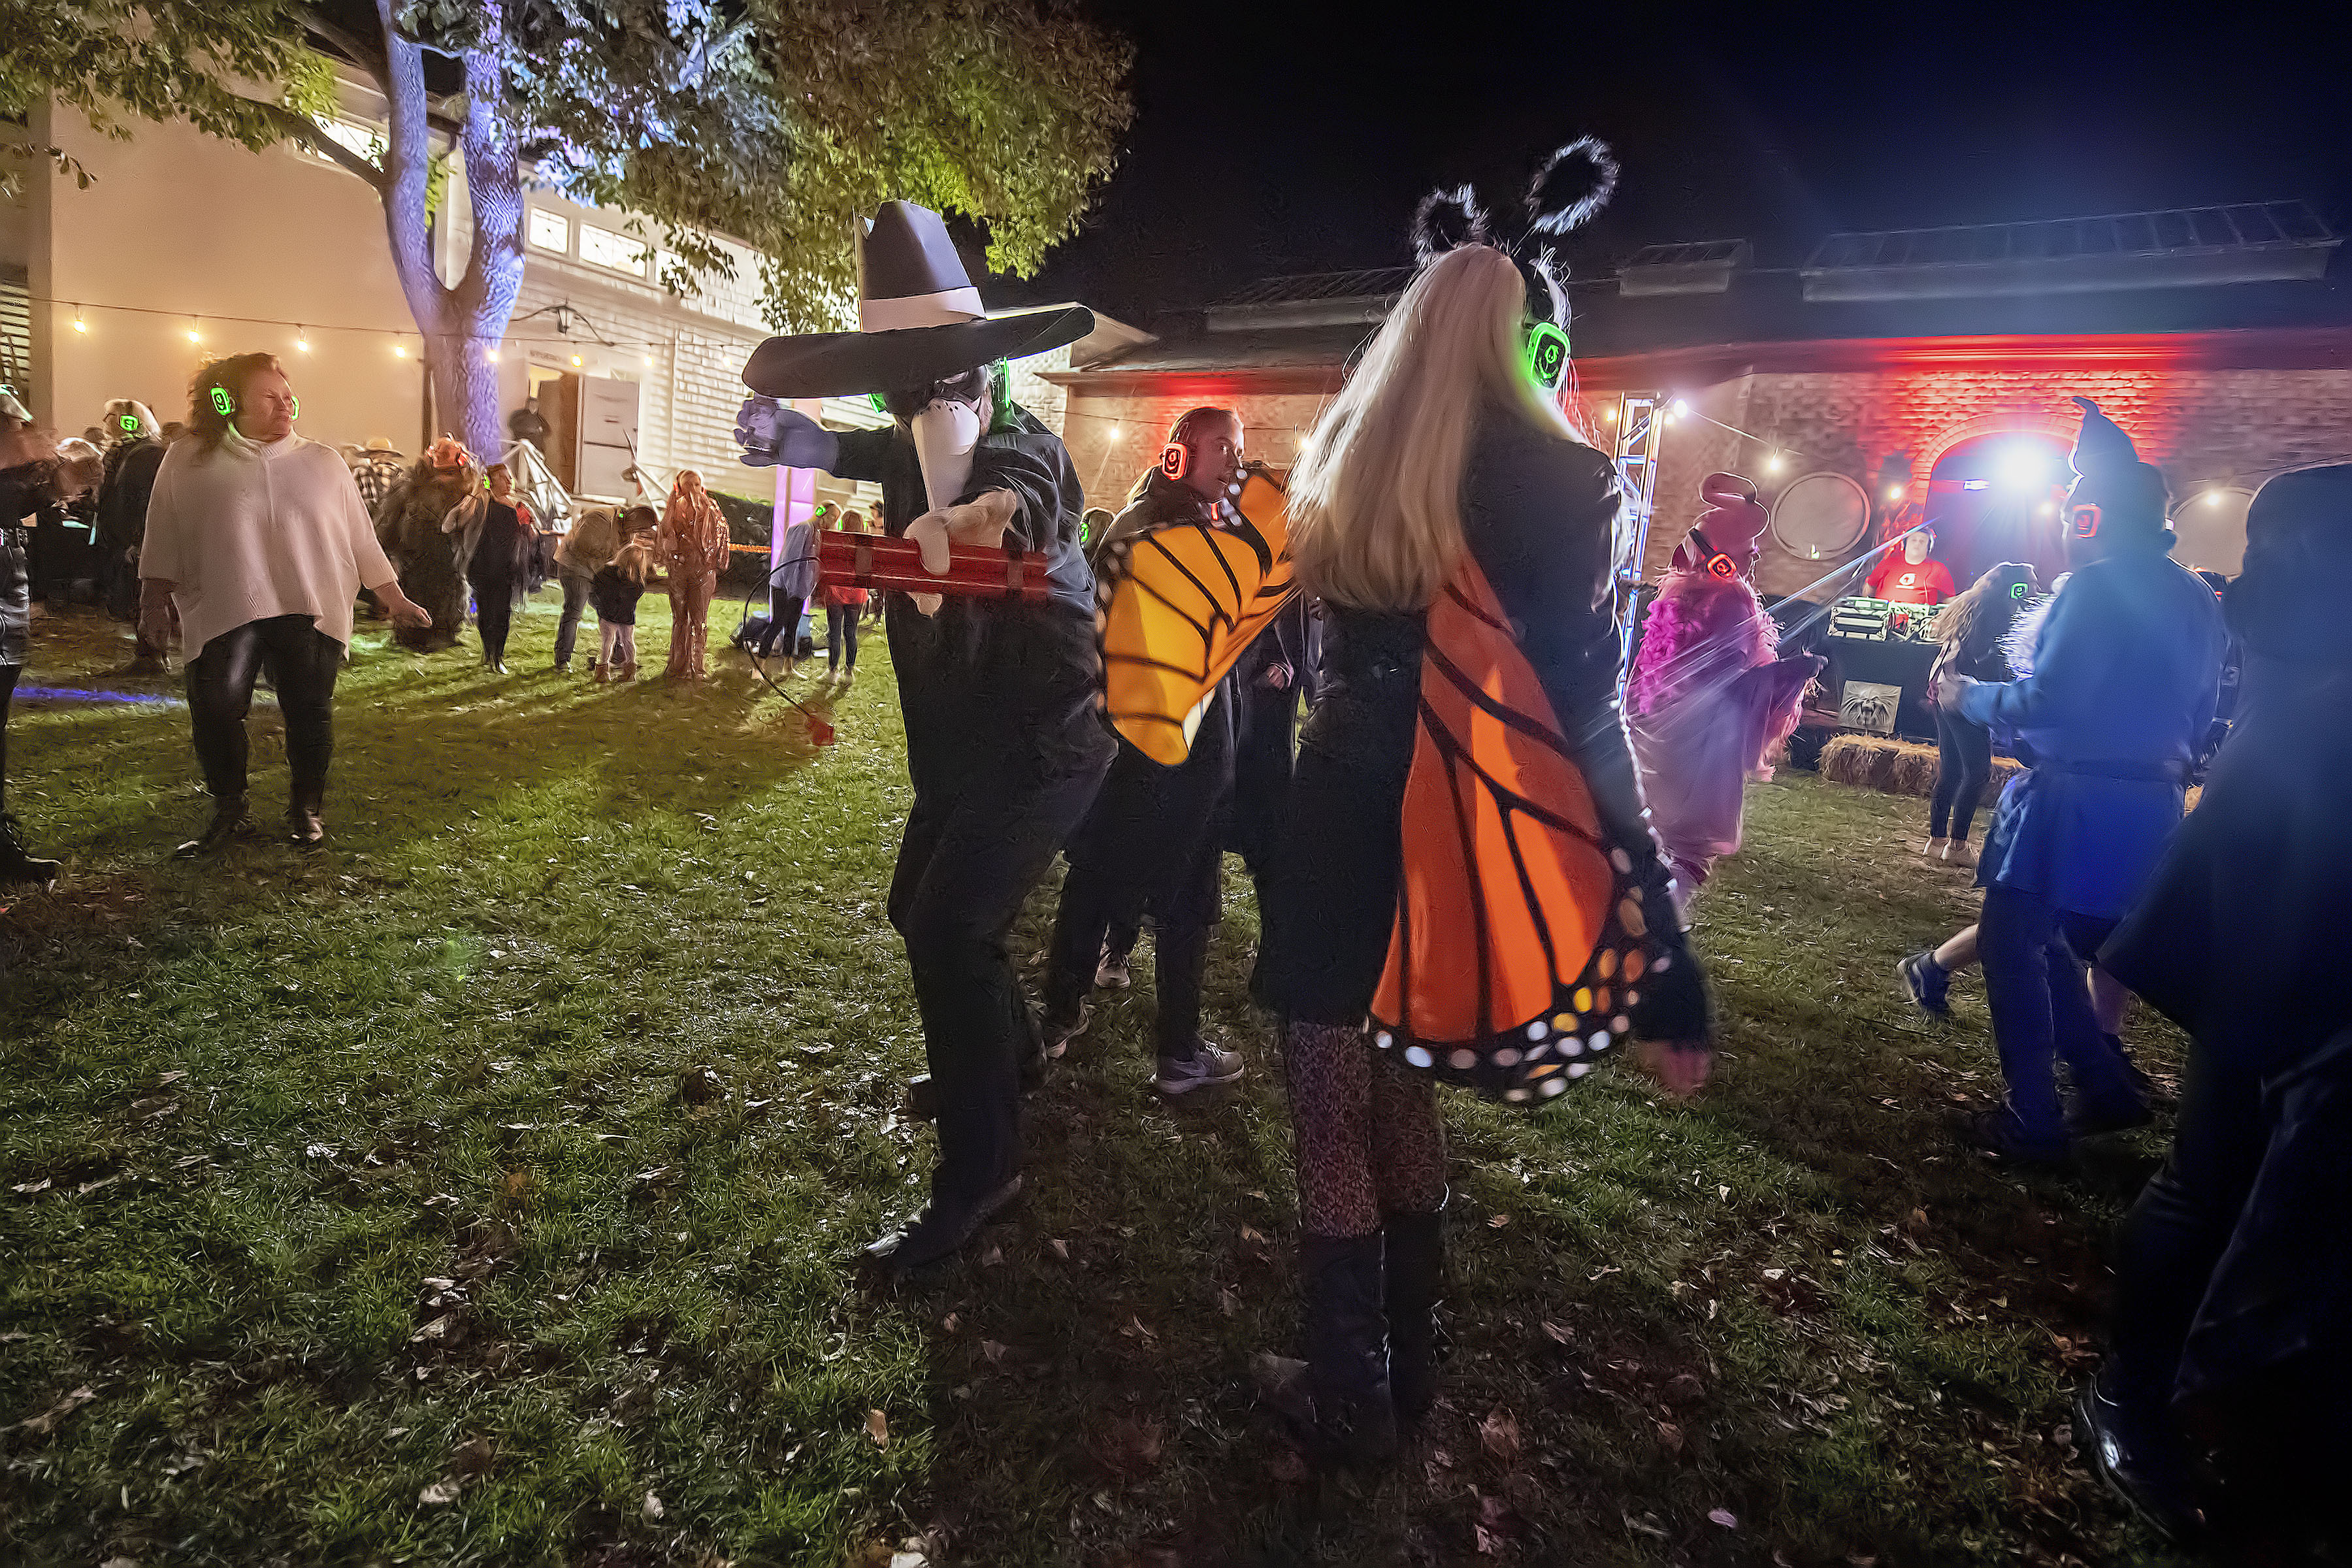 Greg Monske dances with Fay Henderson during the  Halloween Silent Disco Party sponsored by the Southampton Arts Center on Saturday night.  MICAHEL HELLER